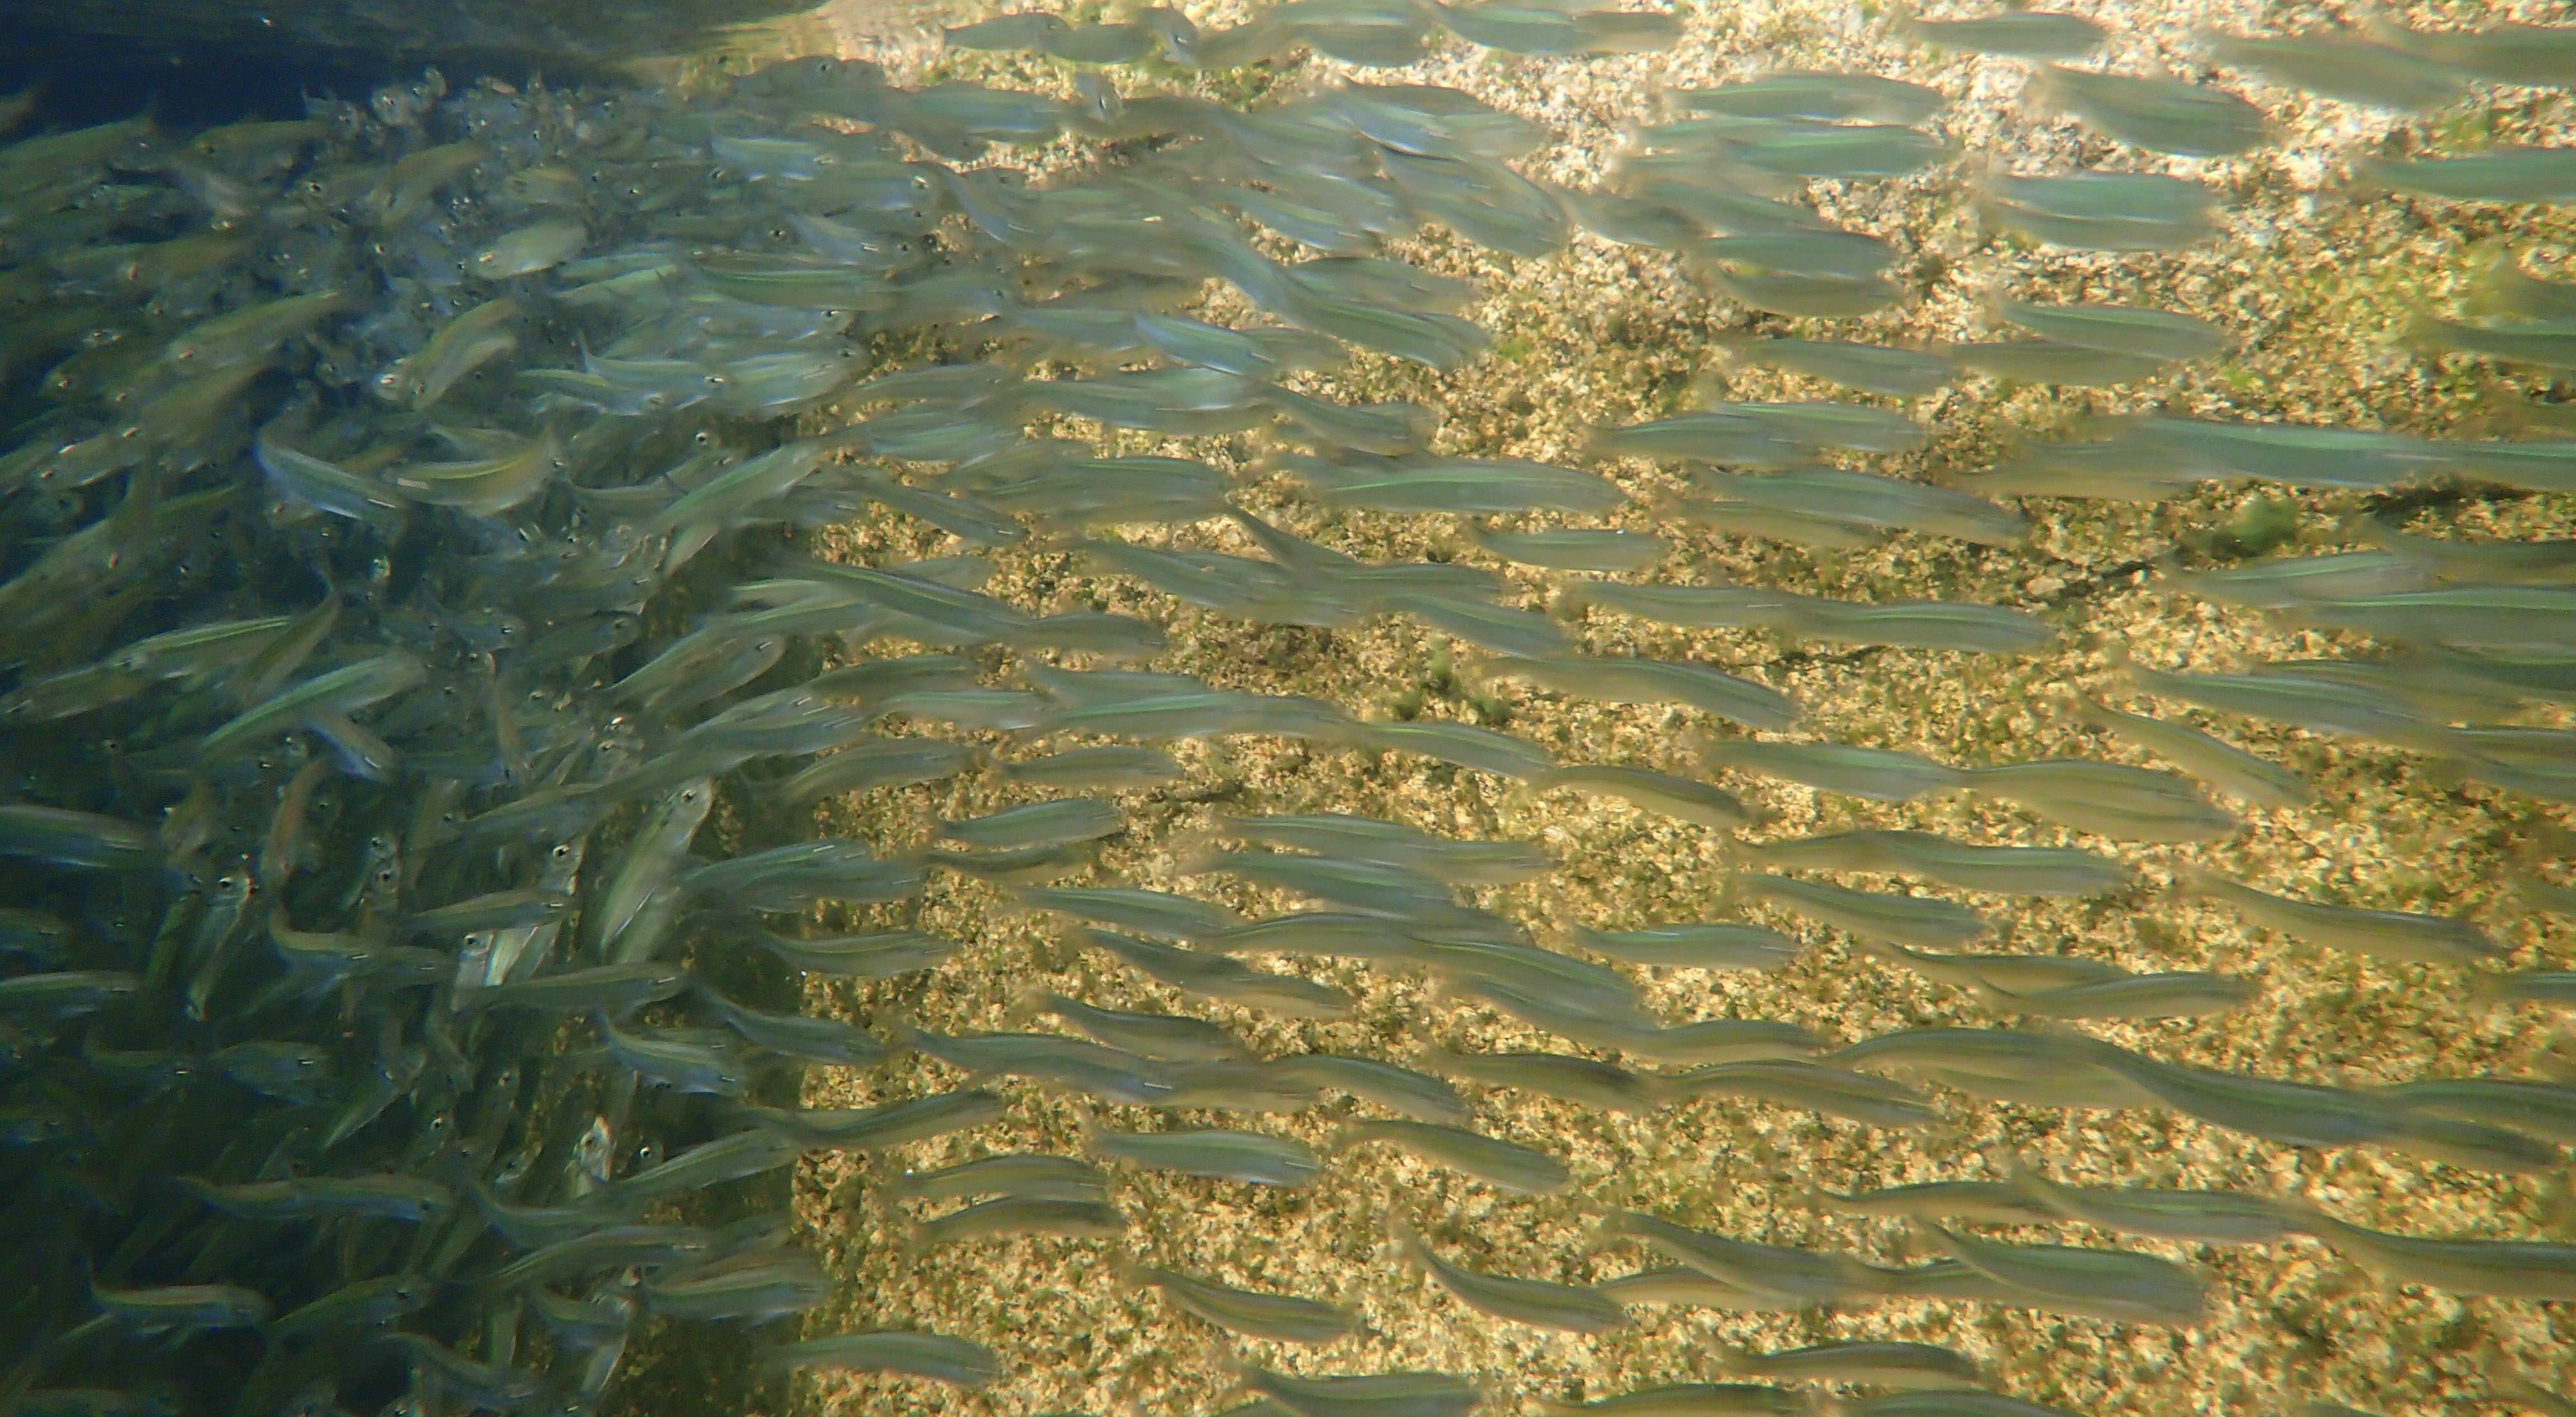 Thousands of young alewives school in a Maine pond.